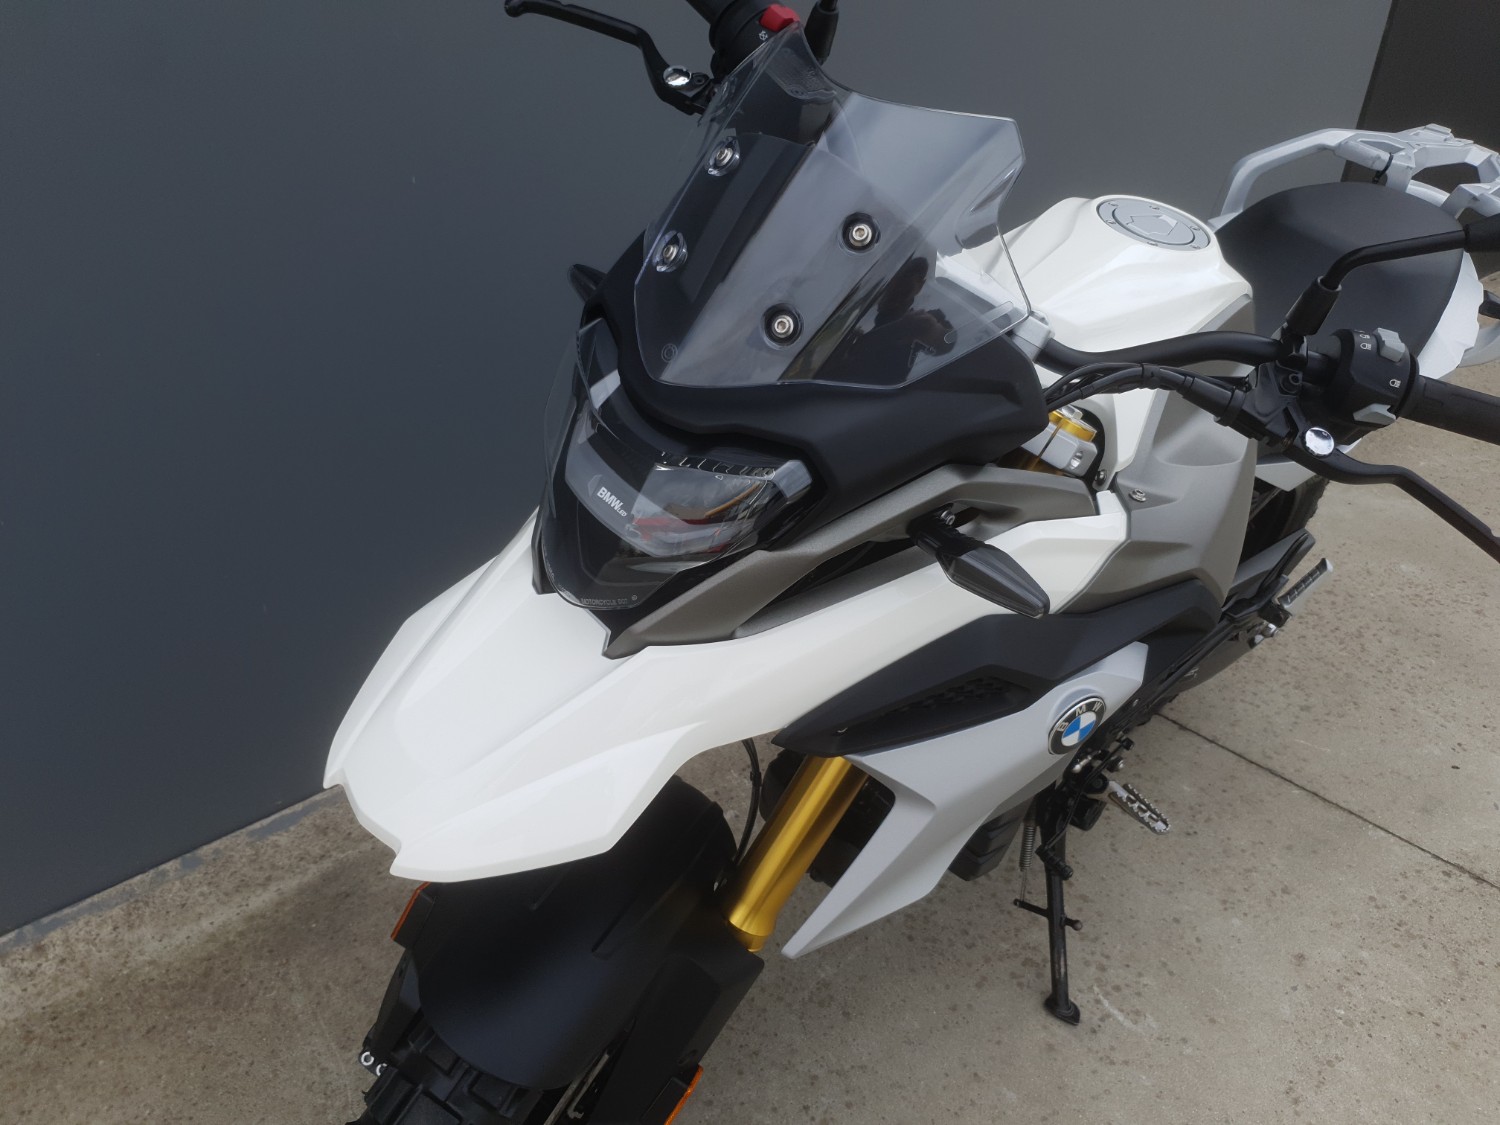 2021 BMW G 310 GS Motorcycle Image 16